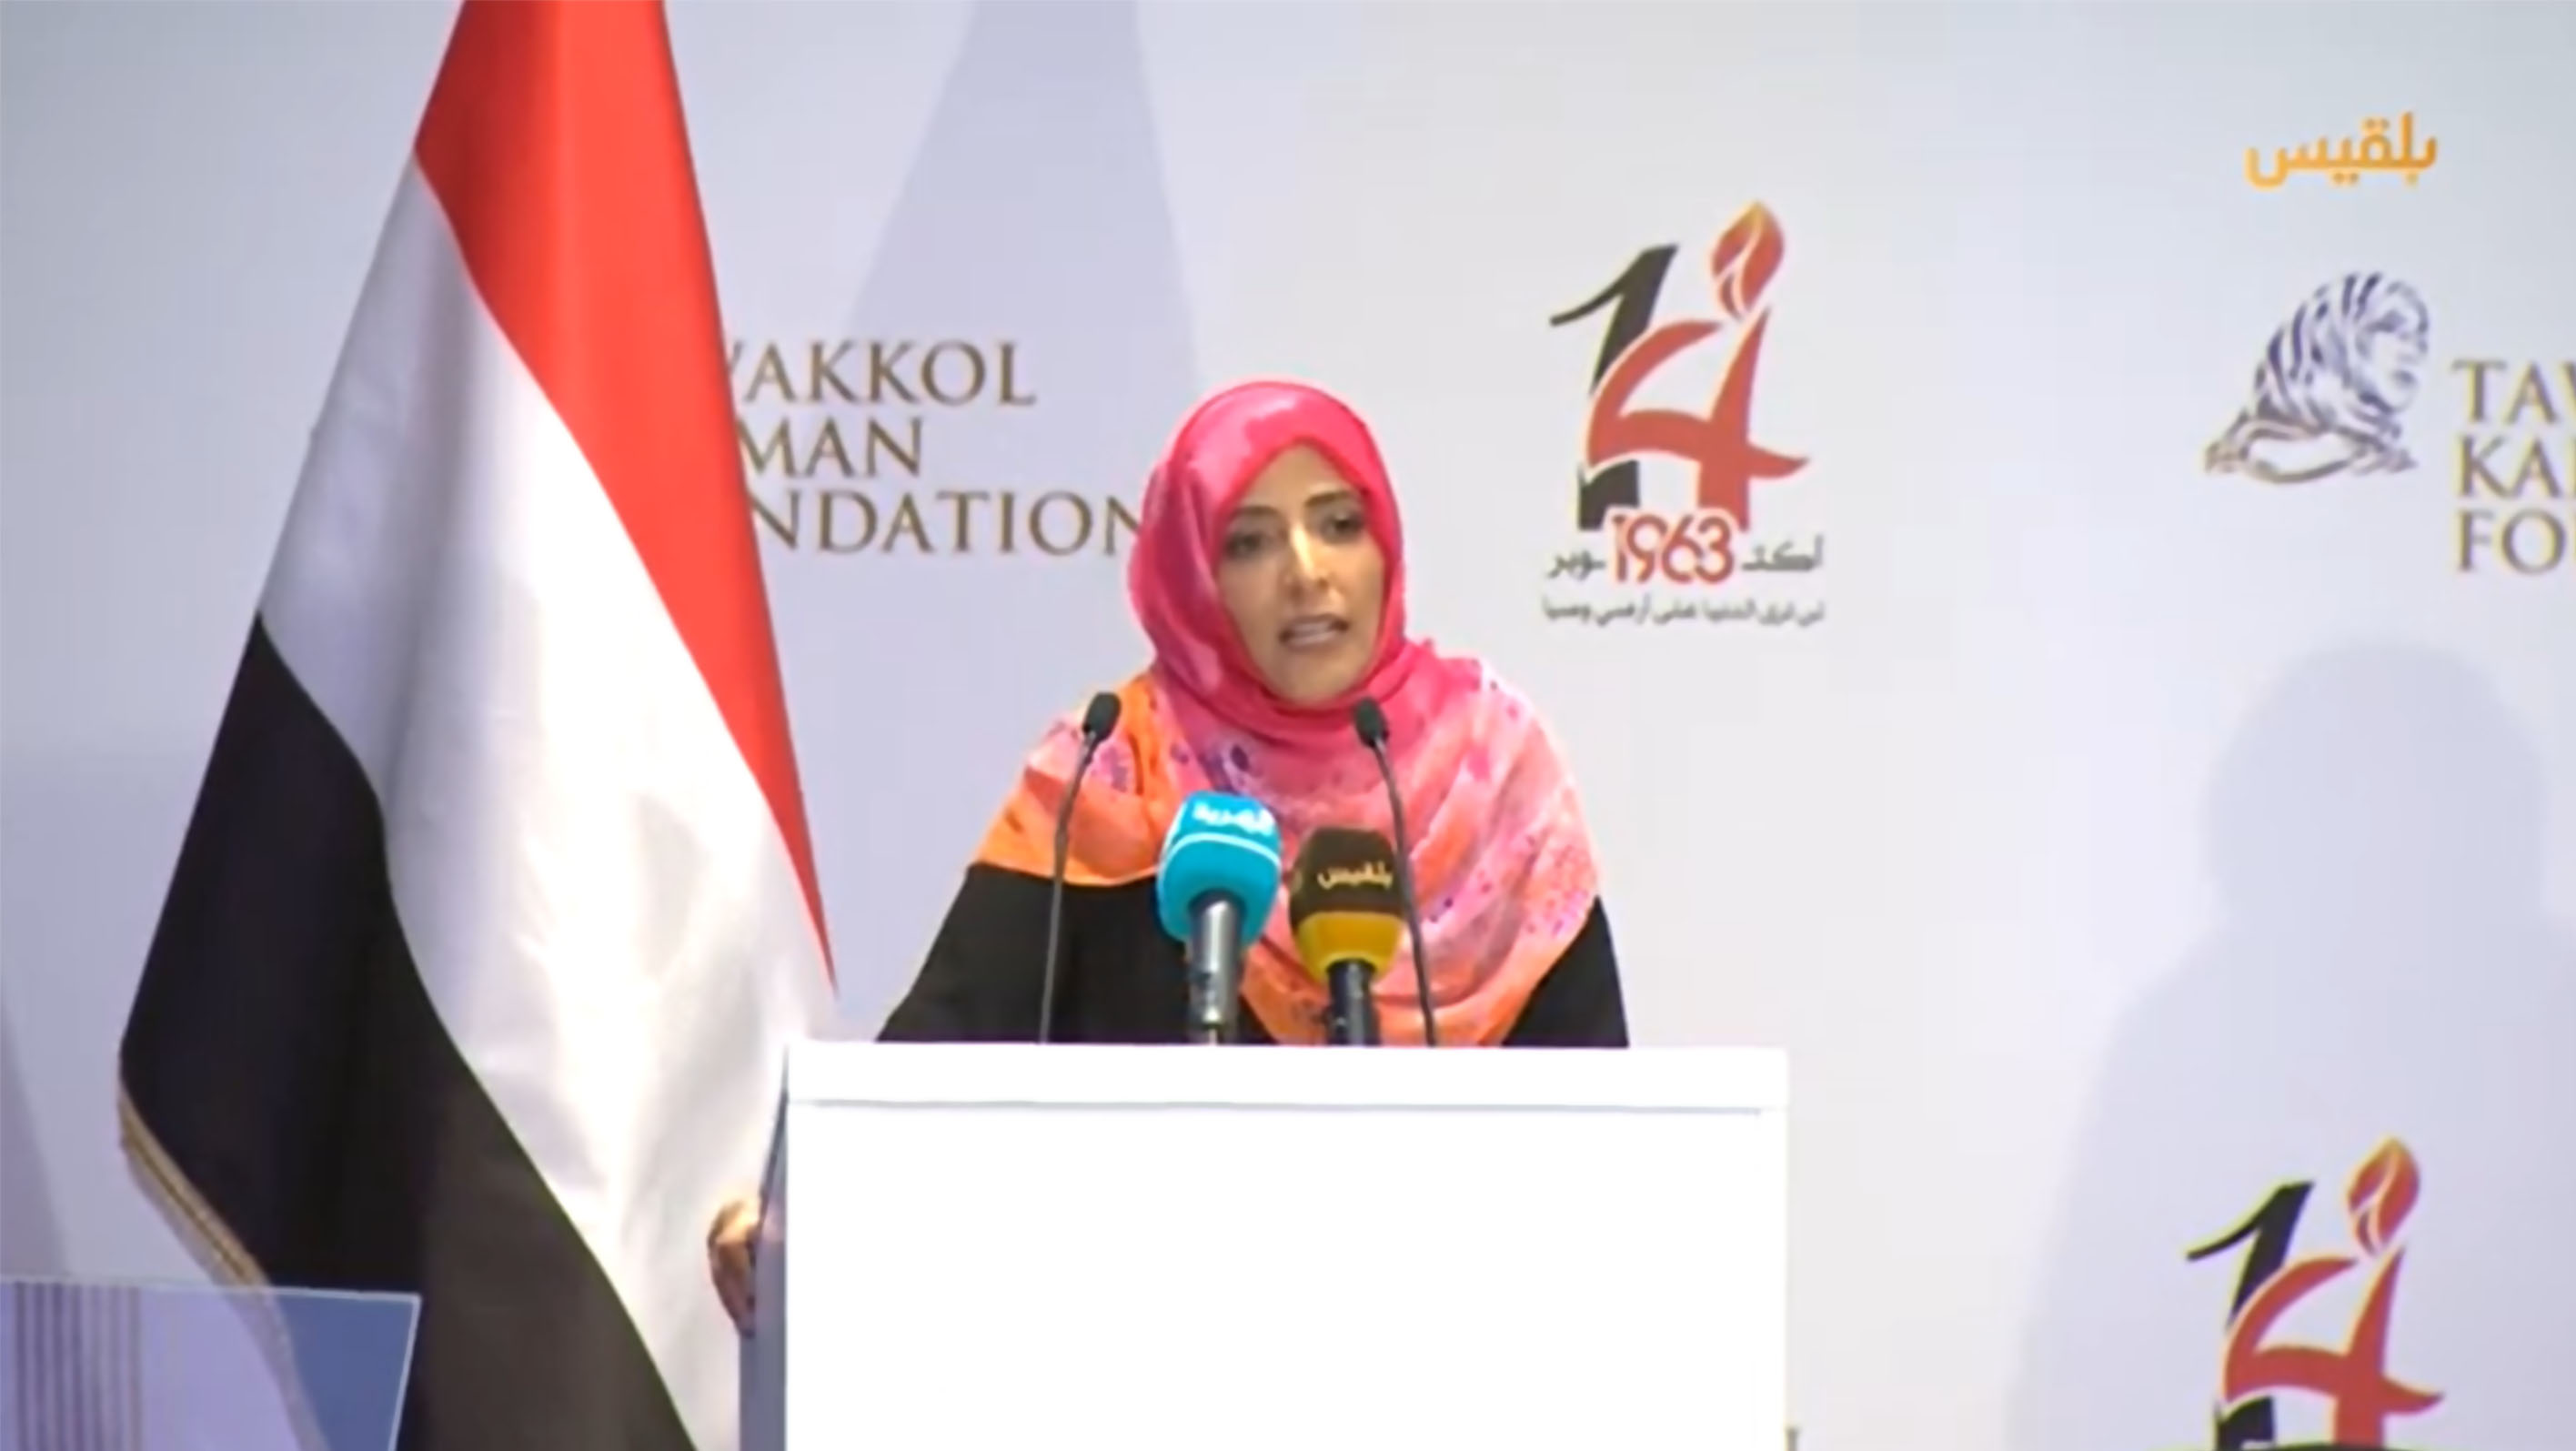 Victory will ultimately be ours, says Tawakkol Karman on 59th anniversary of October 14 Revolution